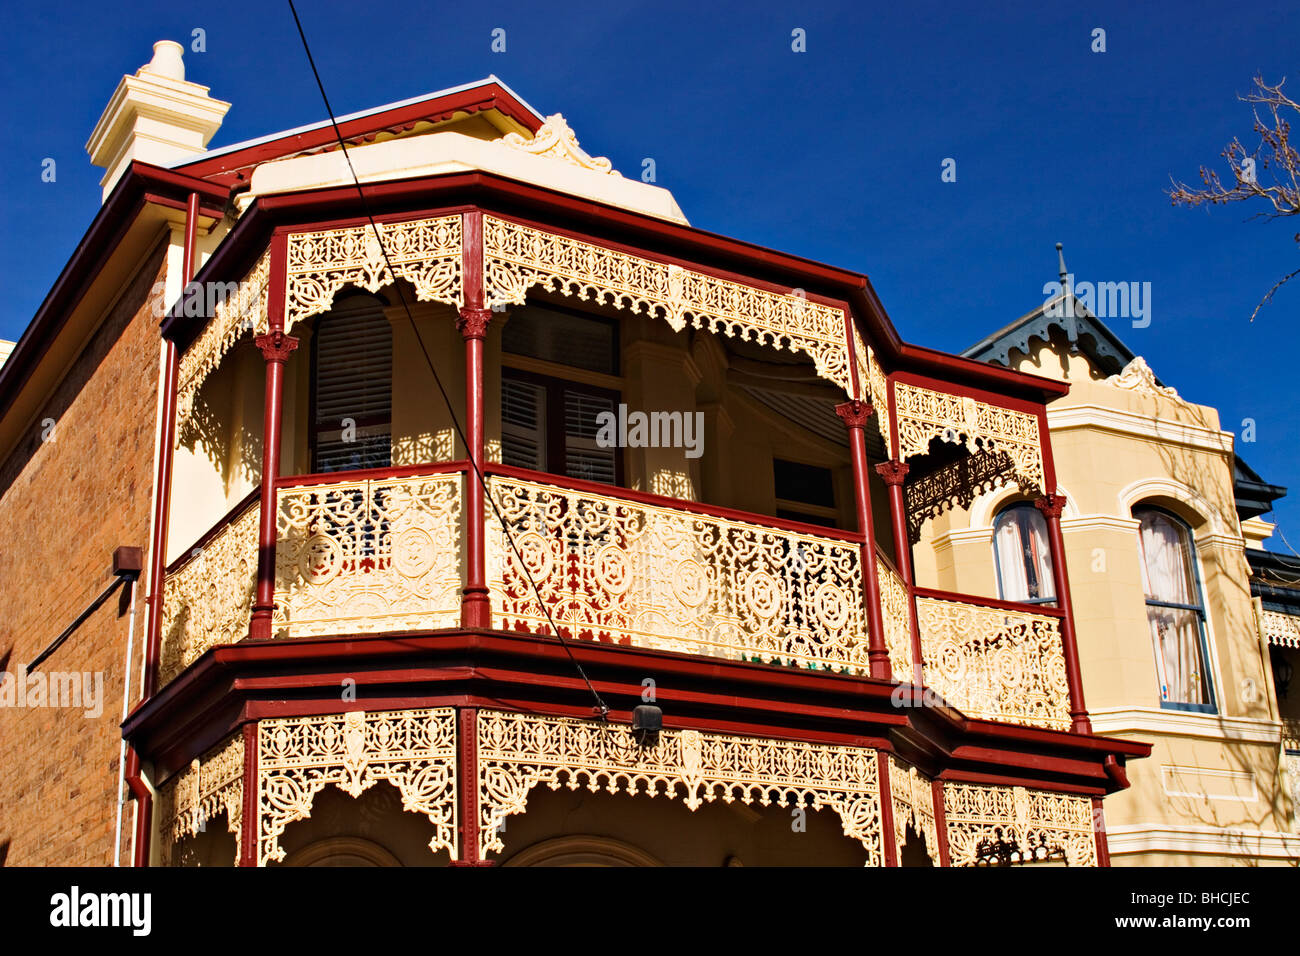 Architecture / Wrought iron detail on a terrace house located in the suburb of Flemington / Melbourne Victoria Australia. Stock Photo